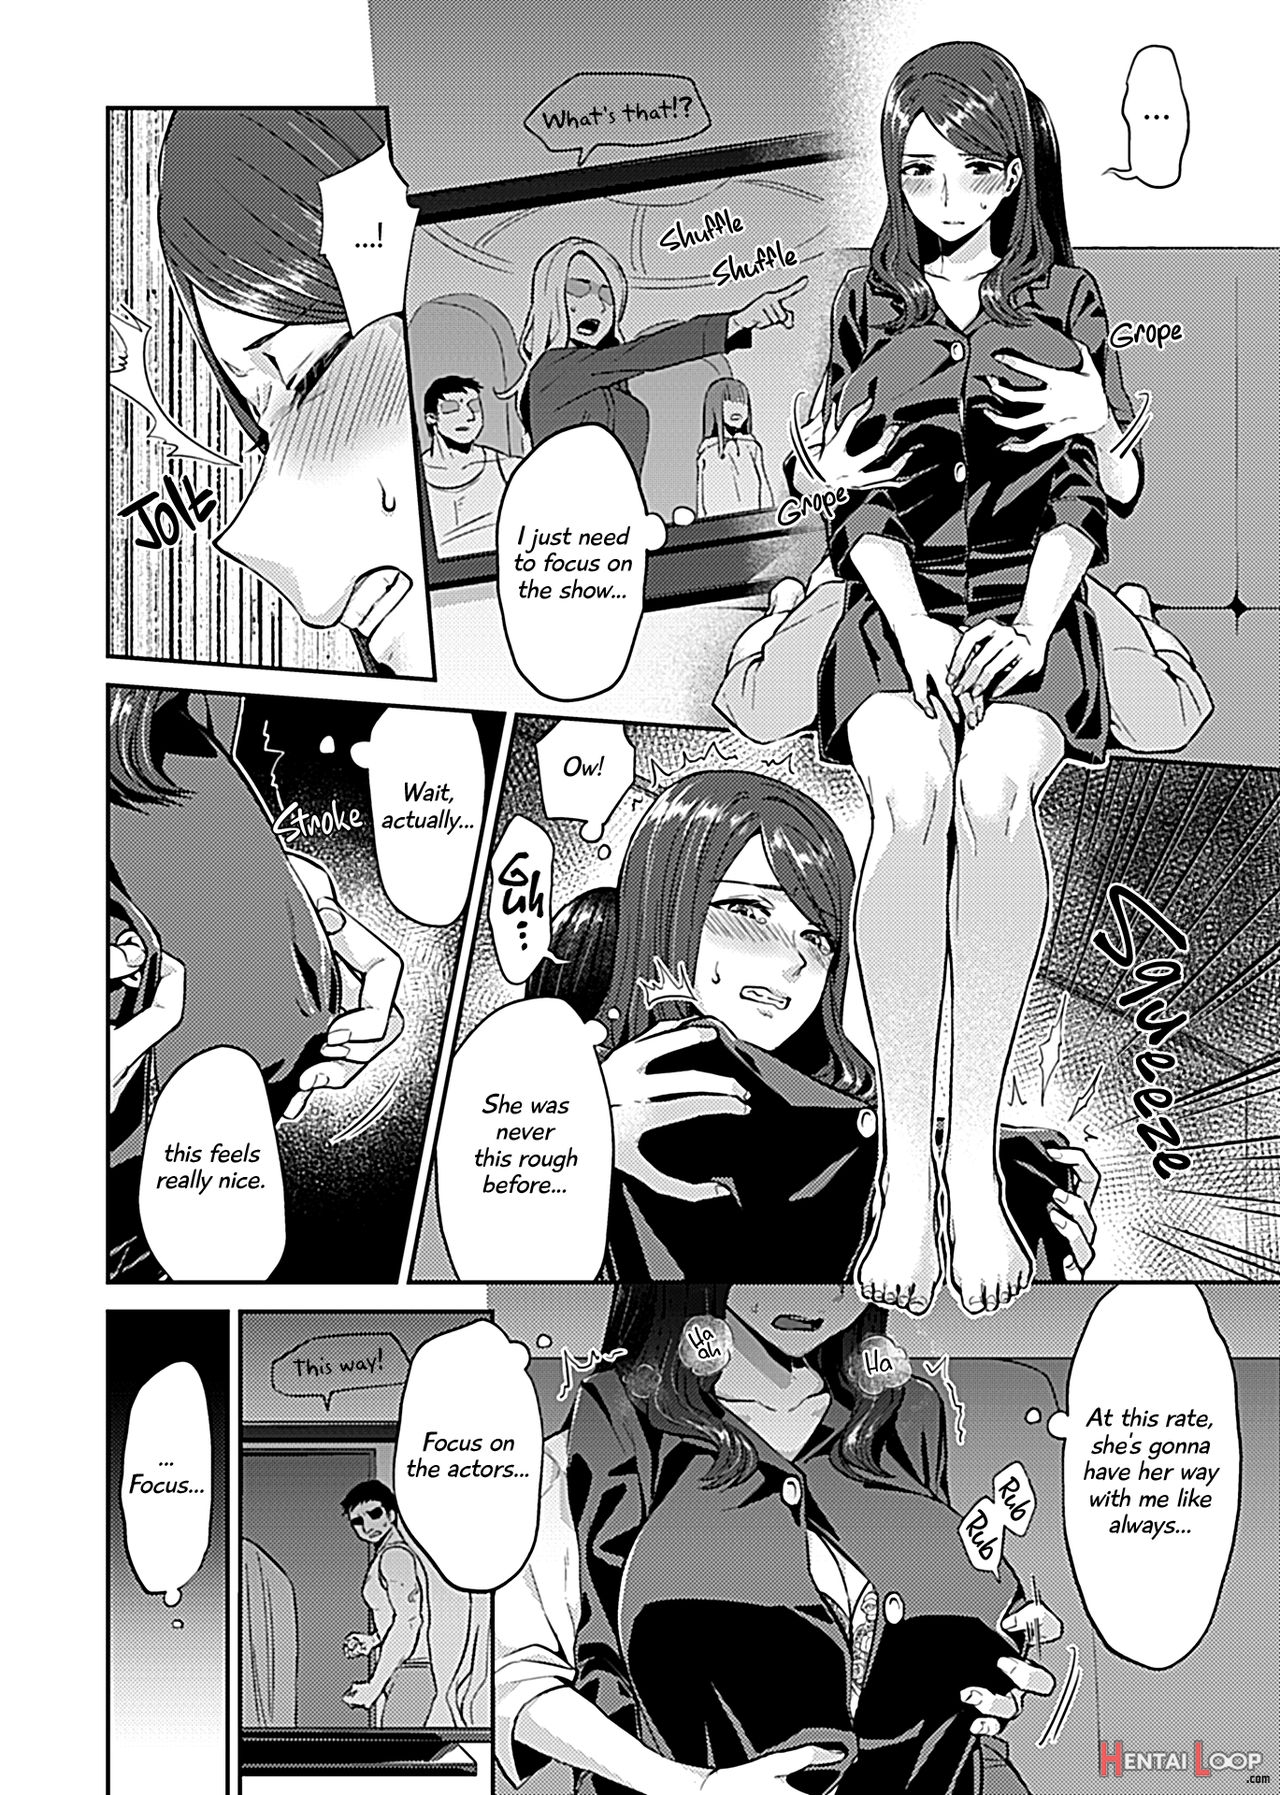 Lilies Are In Full Bloom - Volume 1 page 44